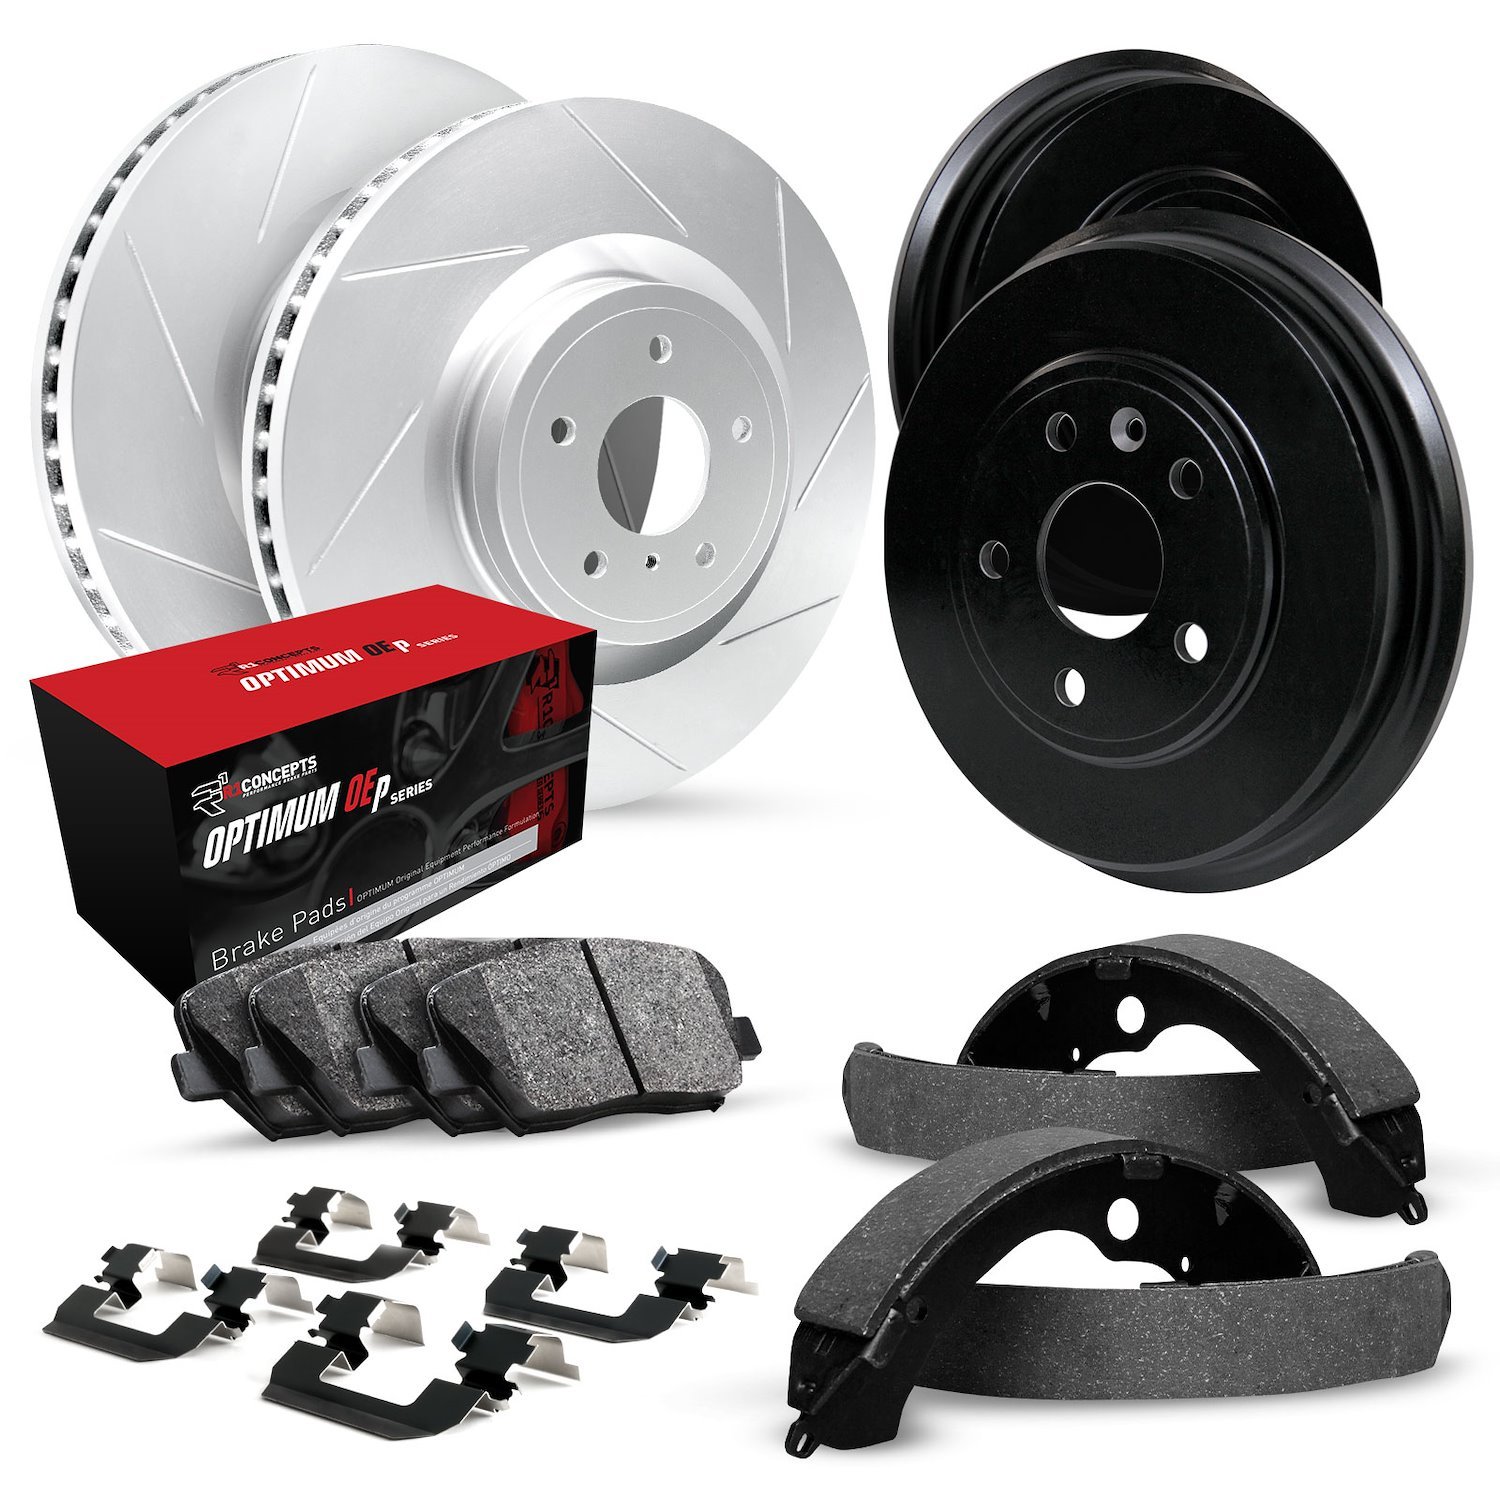 GEO-Carbon Slotted Brake Rotor & Drum Set w/Optimum OE Pads, Shoes, & Hardware, 1971-1990 GM, Position: Front & Rear